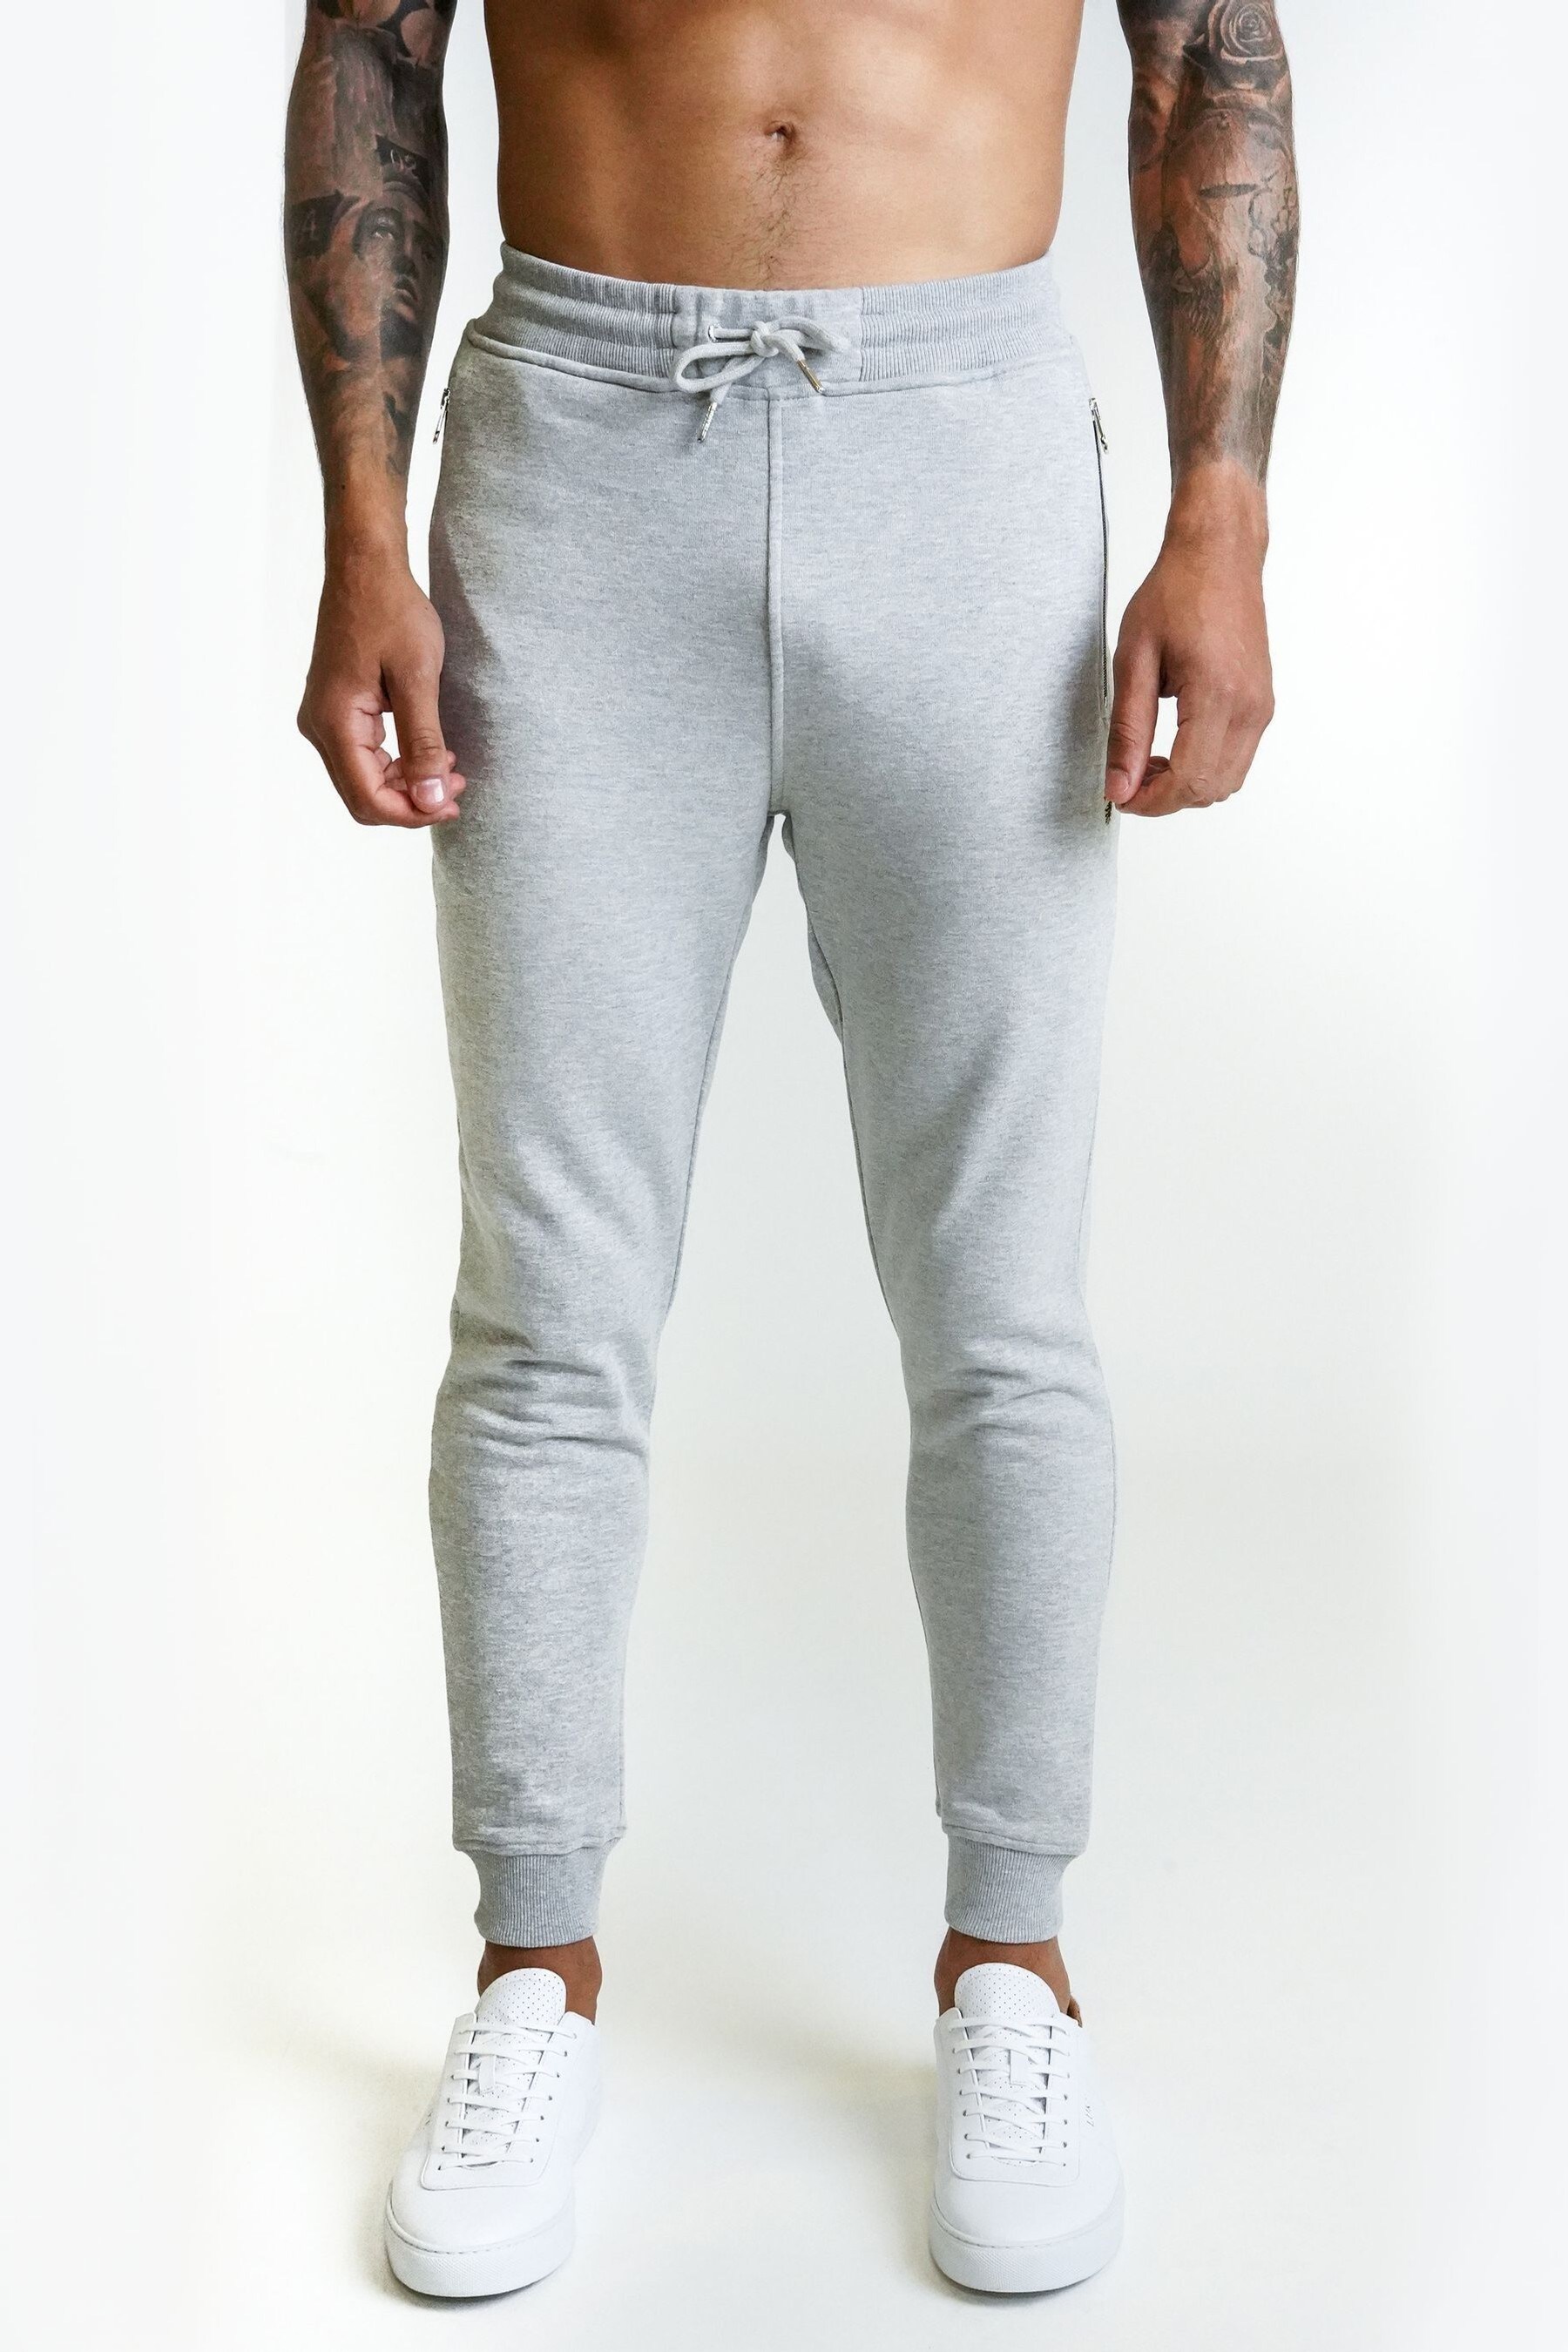 Buy Luke 1977 Rome 2 Joggers from the Next UK online shop